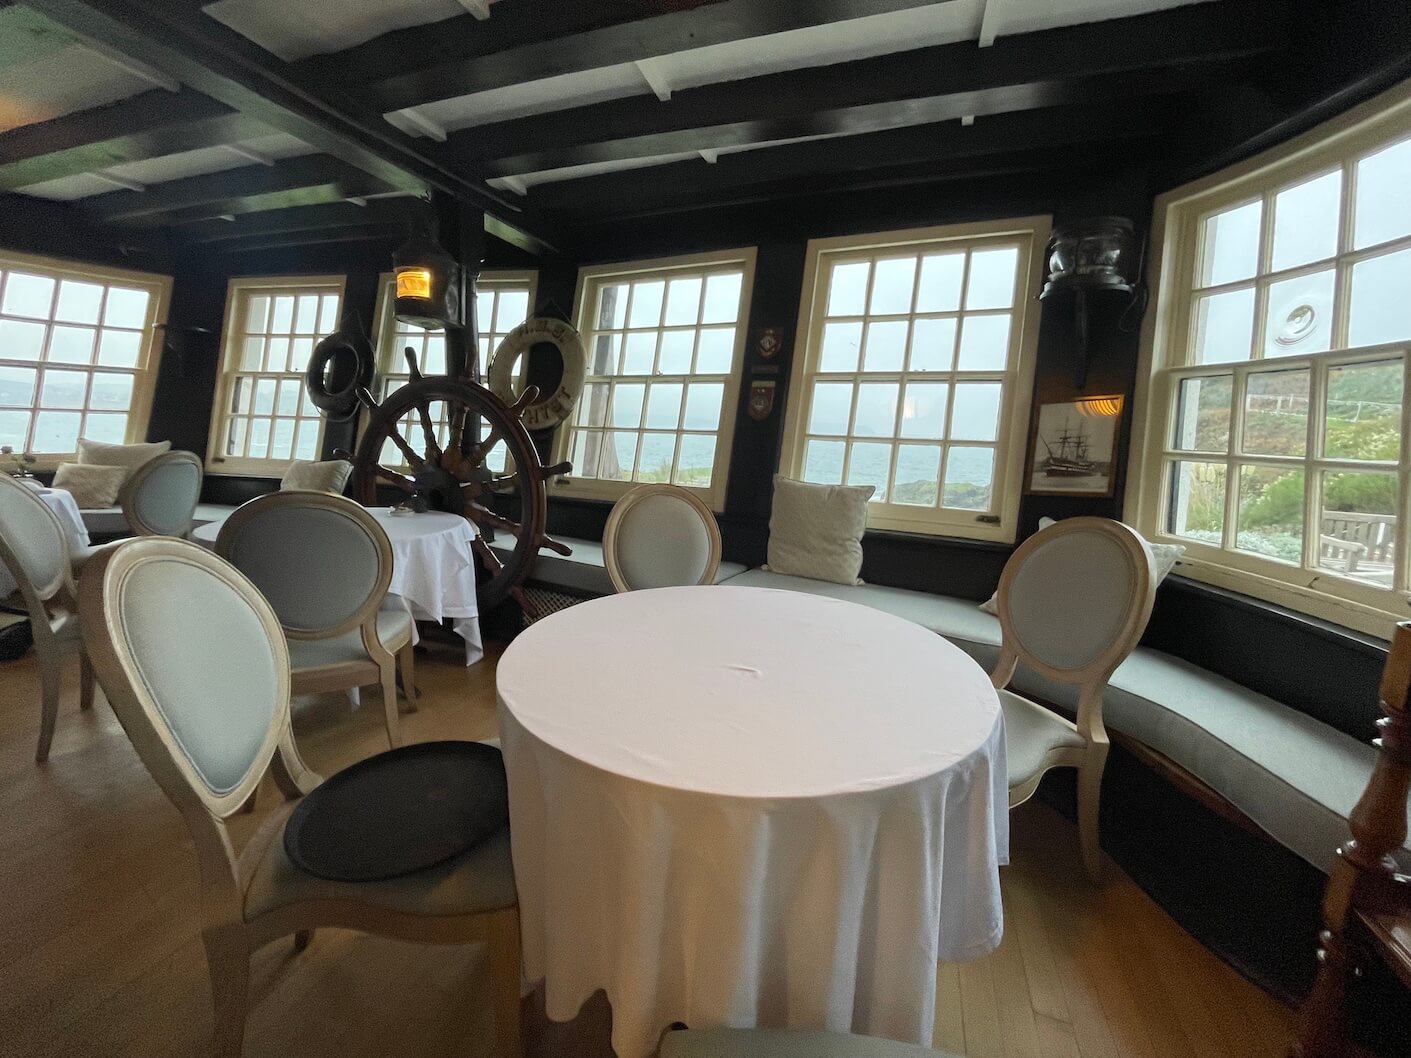 The Captain's Cabin is at the end of the Nettlefold restaurant and was once part of the HMS Ganges ship